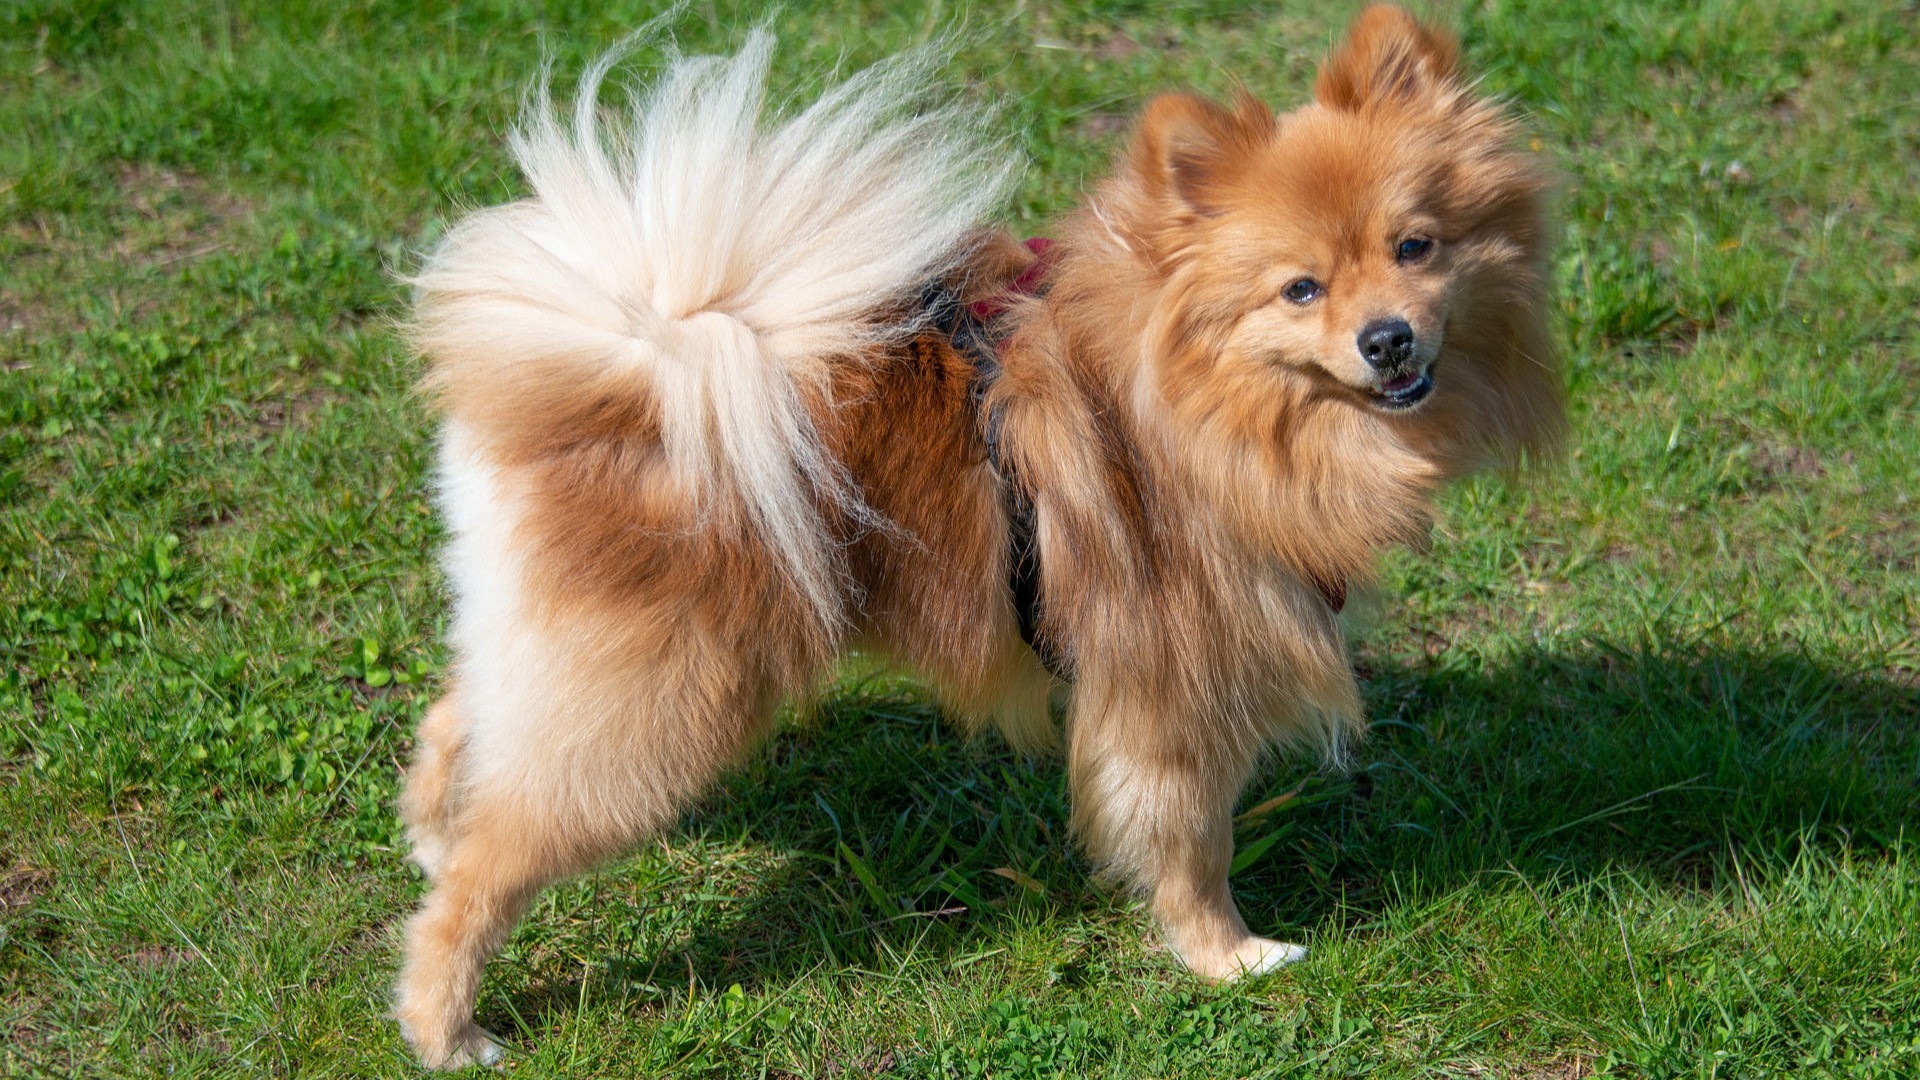 Why Pomeranian Are the Worst Dogs?